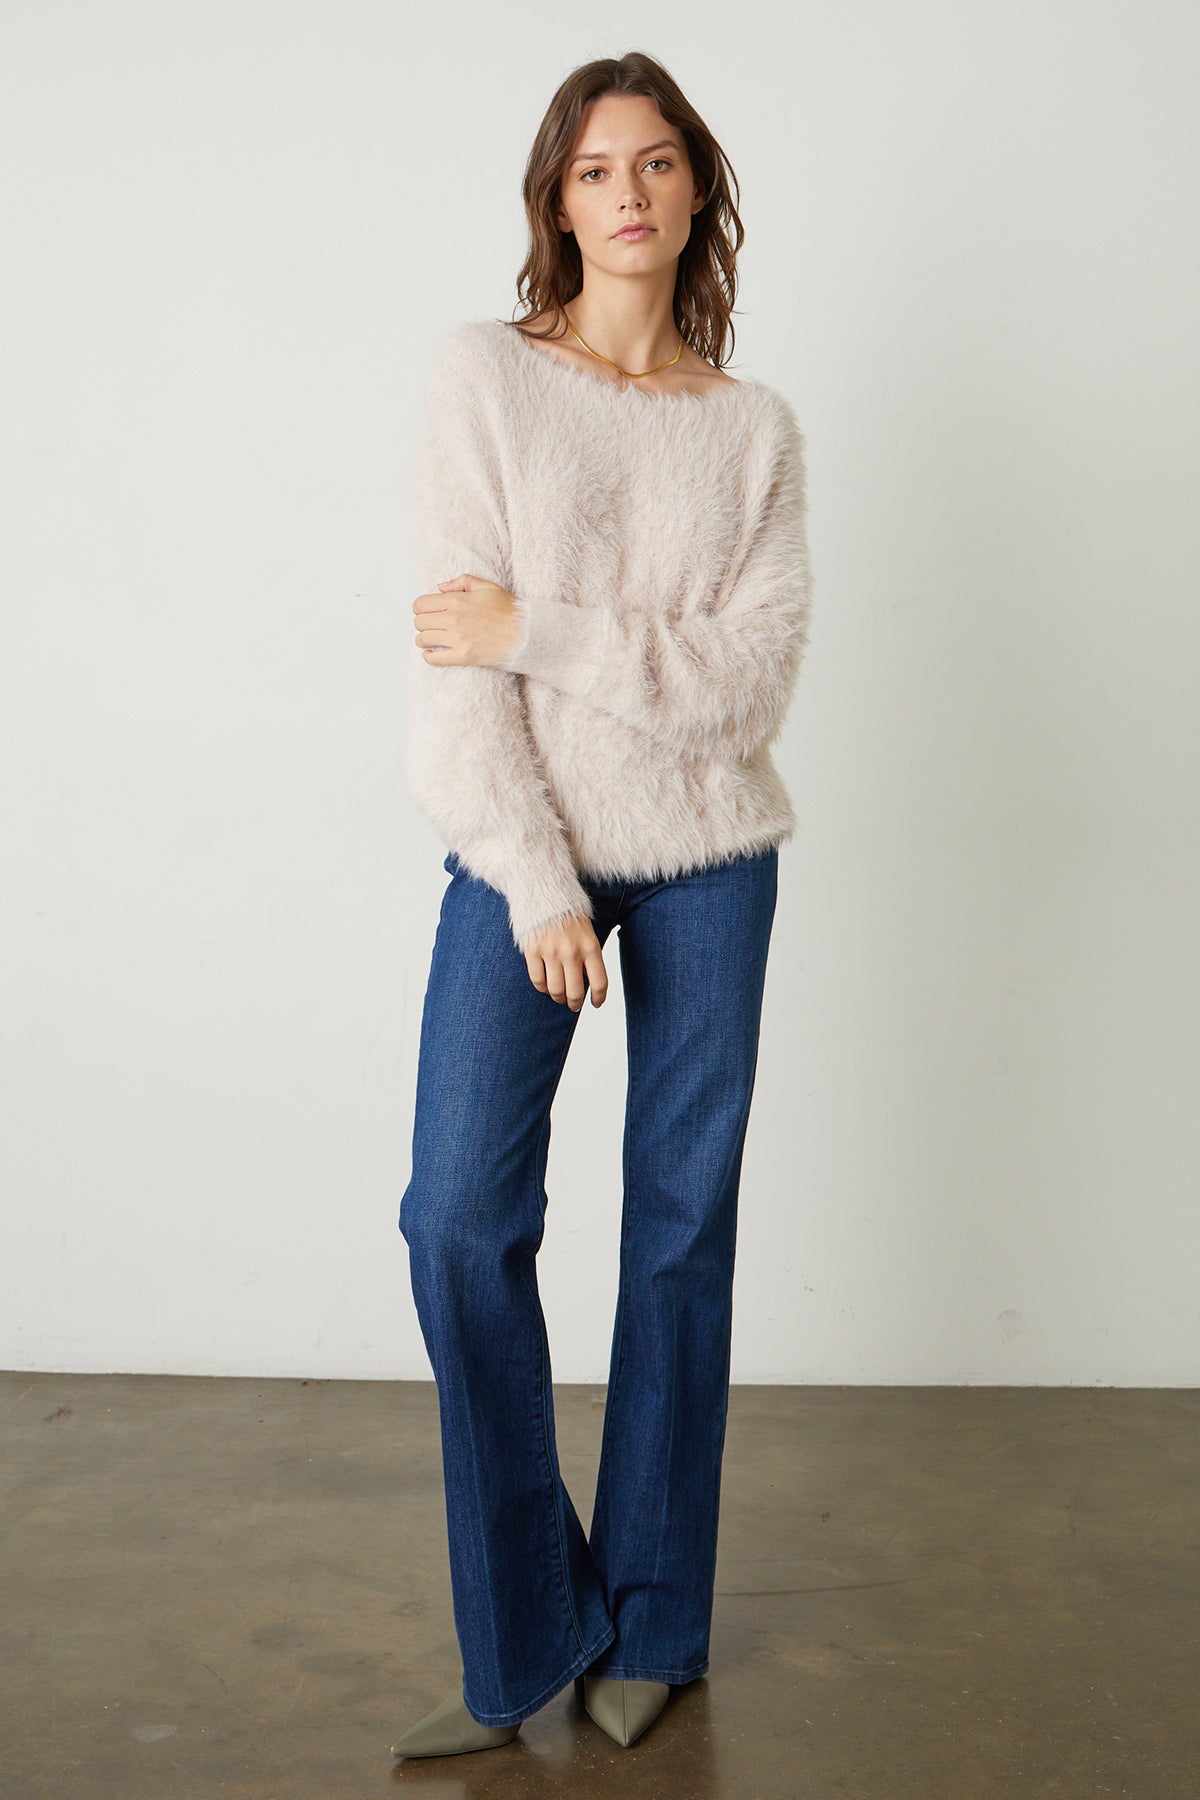   Betty Feather Yarn Boat Neck Sweater in pale blush pink with blue denim and heels full length front 